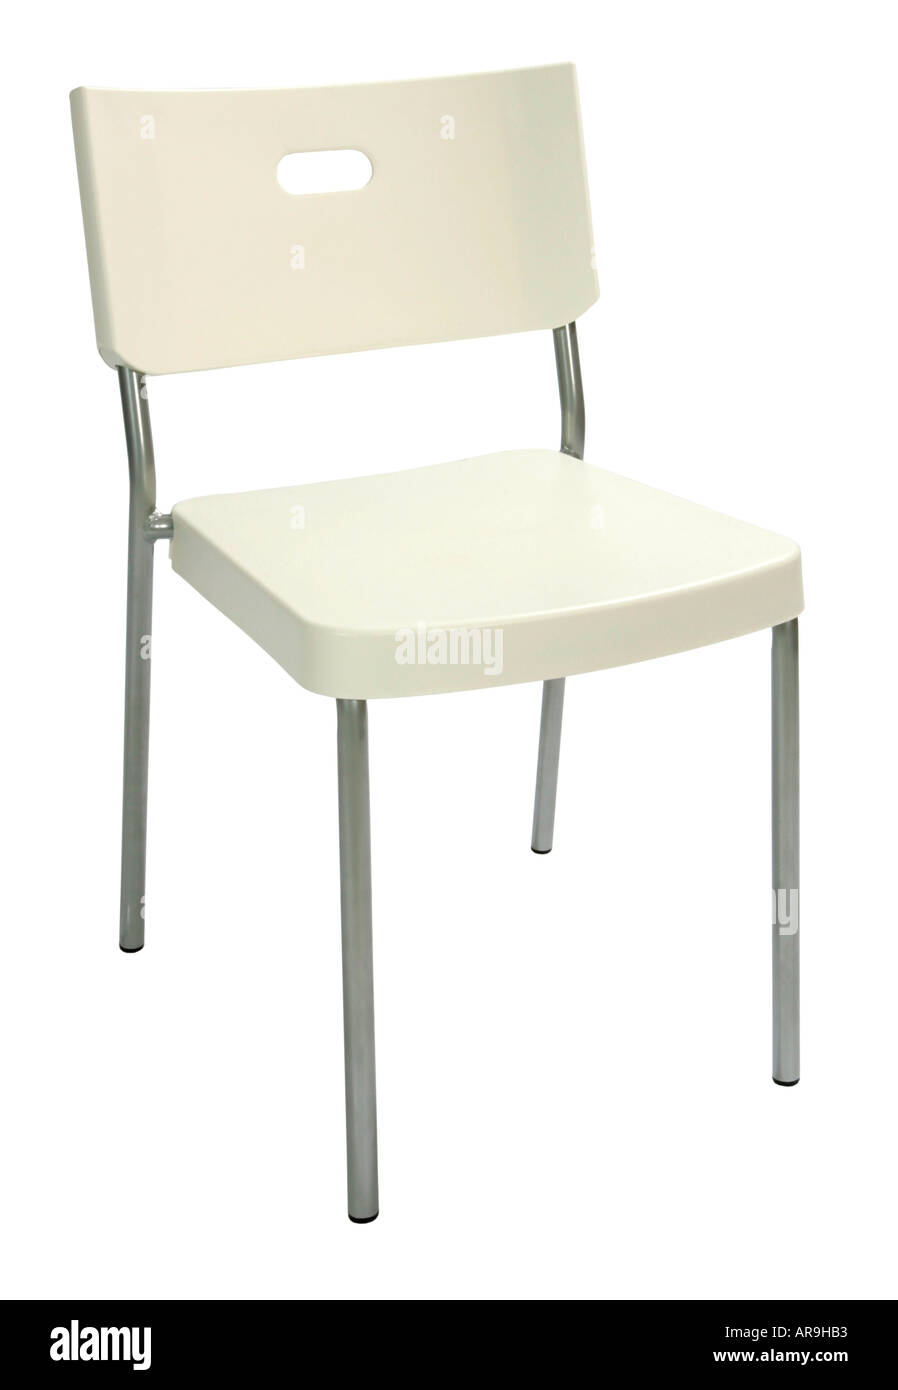 white chair plastic chair seat furniture object colour indoor nobody vertical color convenient studio interior IKEA Stock Photo